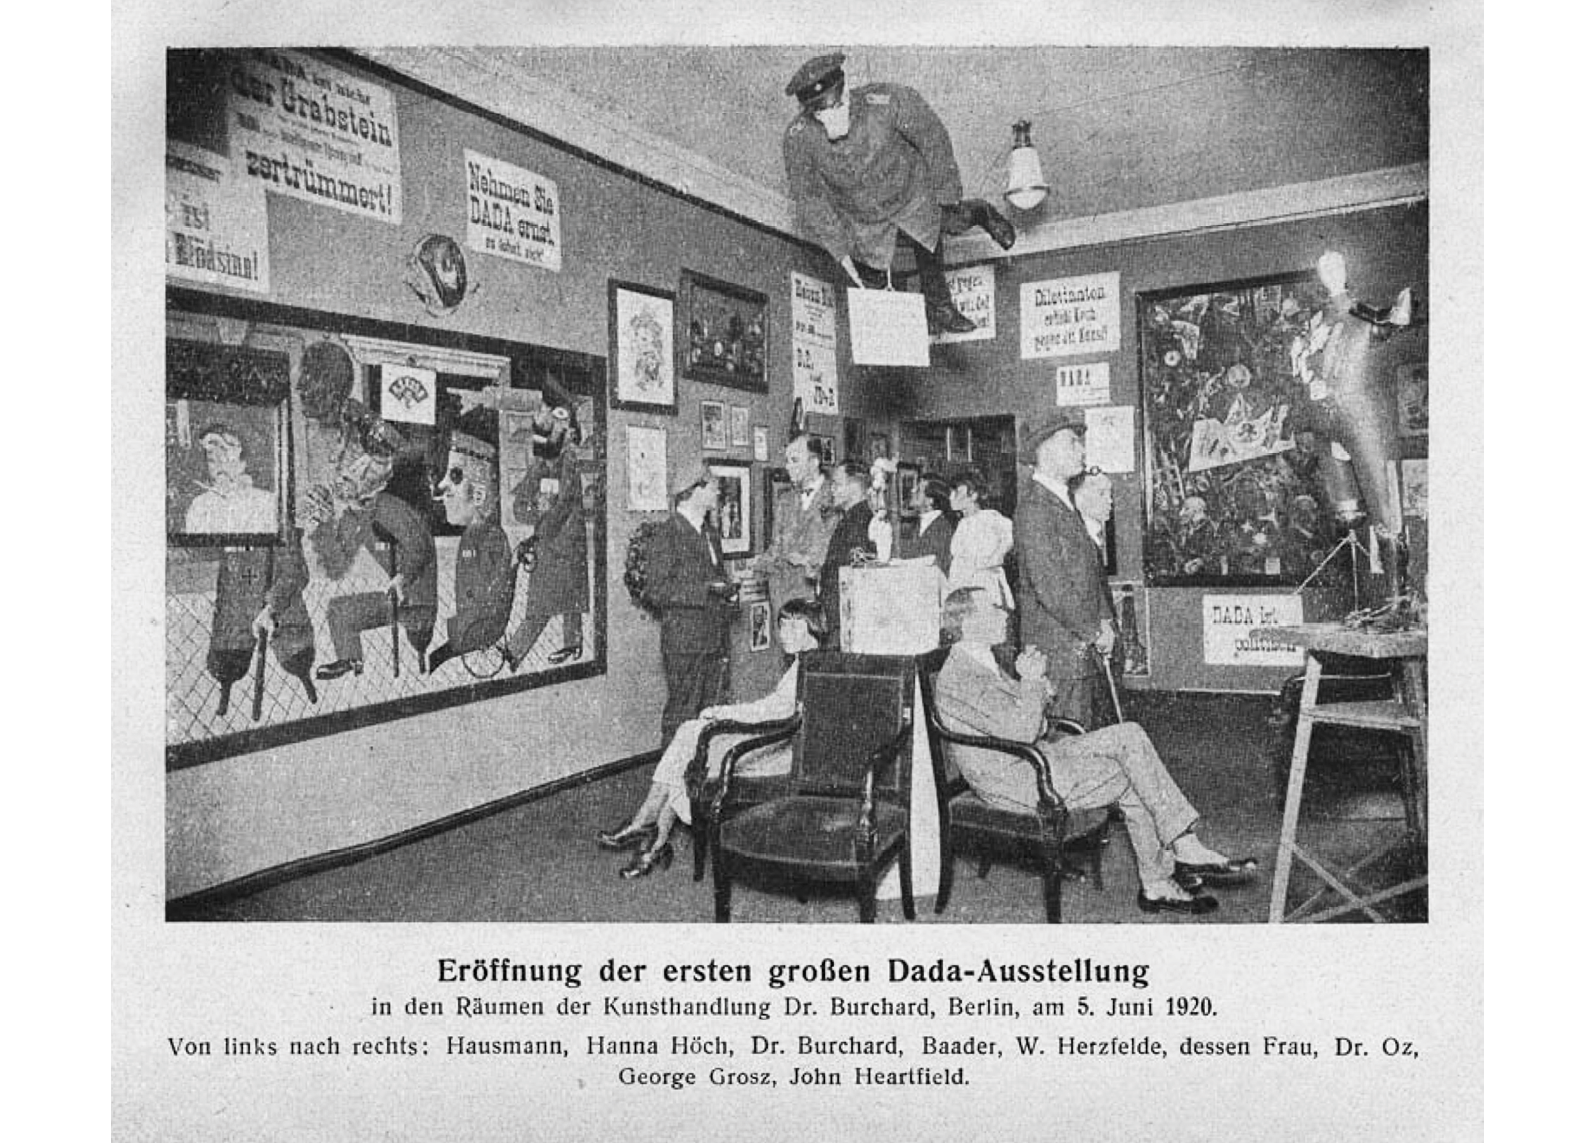 A black and white picture of the grand opening of the first Dada exhibition in 1920 Berlin: in the center, an effigy of a German officer with a pig’s head hangs from the ceiling over a circle of chairs; exhibition visitors enter the room, and observe the various exhibition pieces; on the walls are various art pieces such as painting, drawings, pictures, and posters written in German; on the bottom a title and description of the photographs and names of visitors written in German.